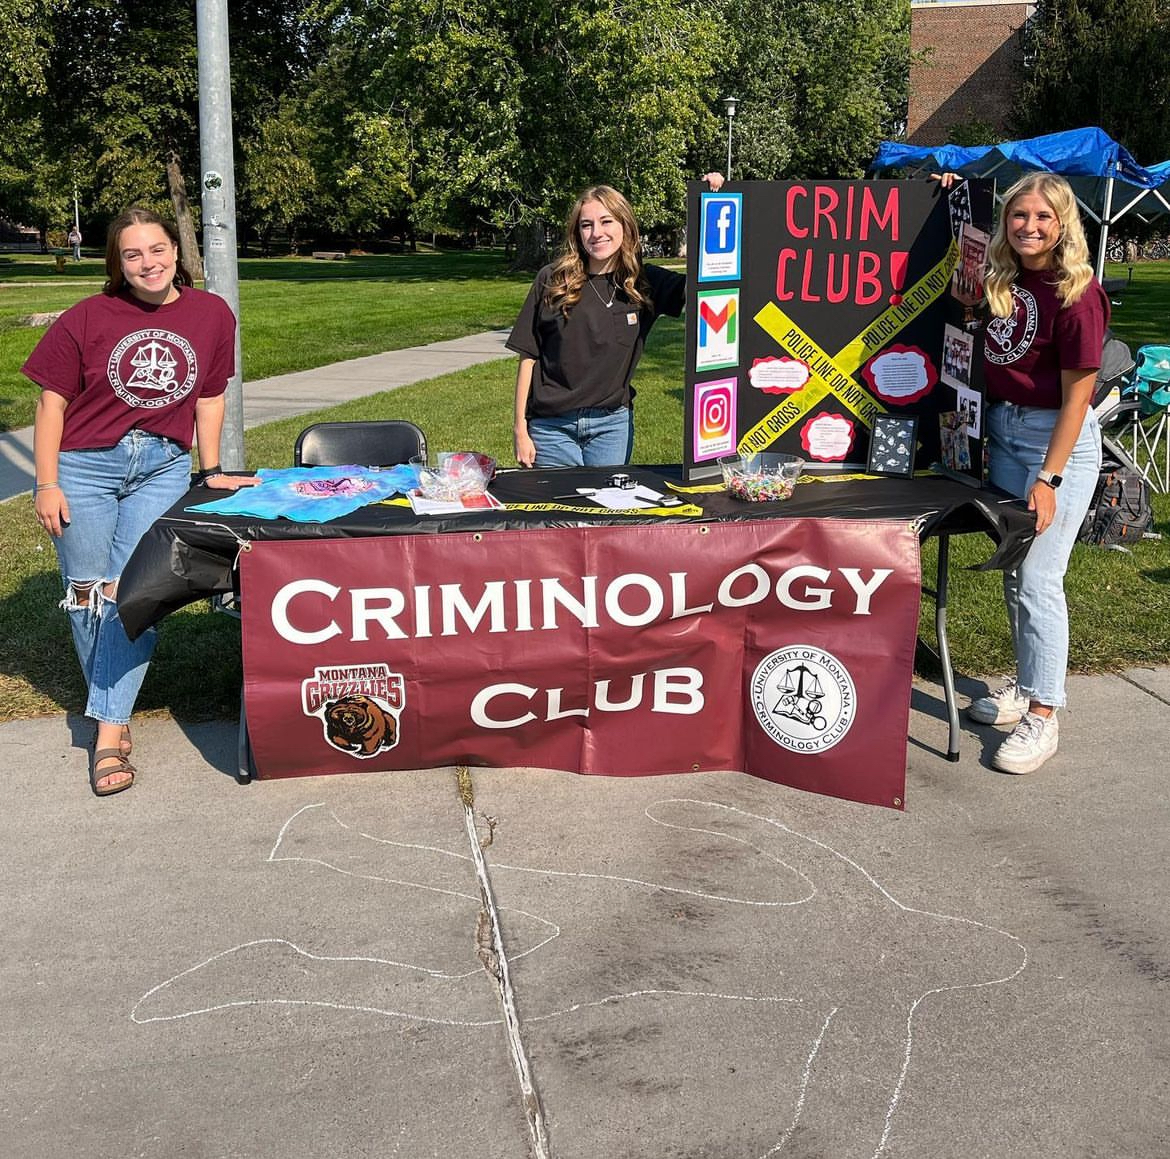 Crim Club students at an informational booth with a chalk outline drawn on the ground at a student welcome event.